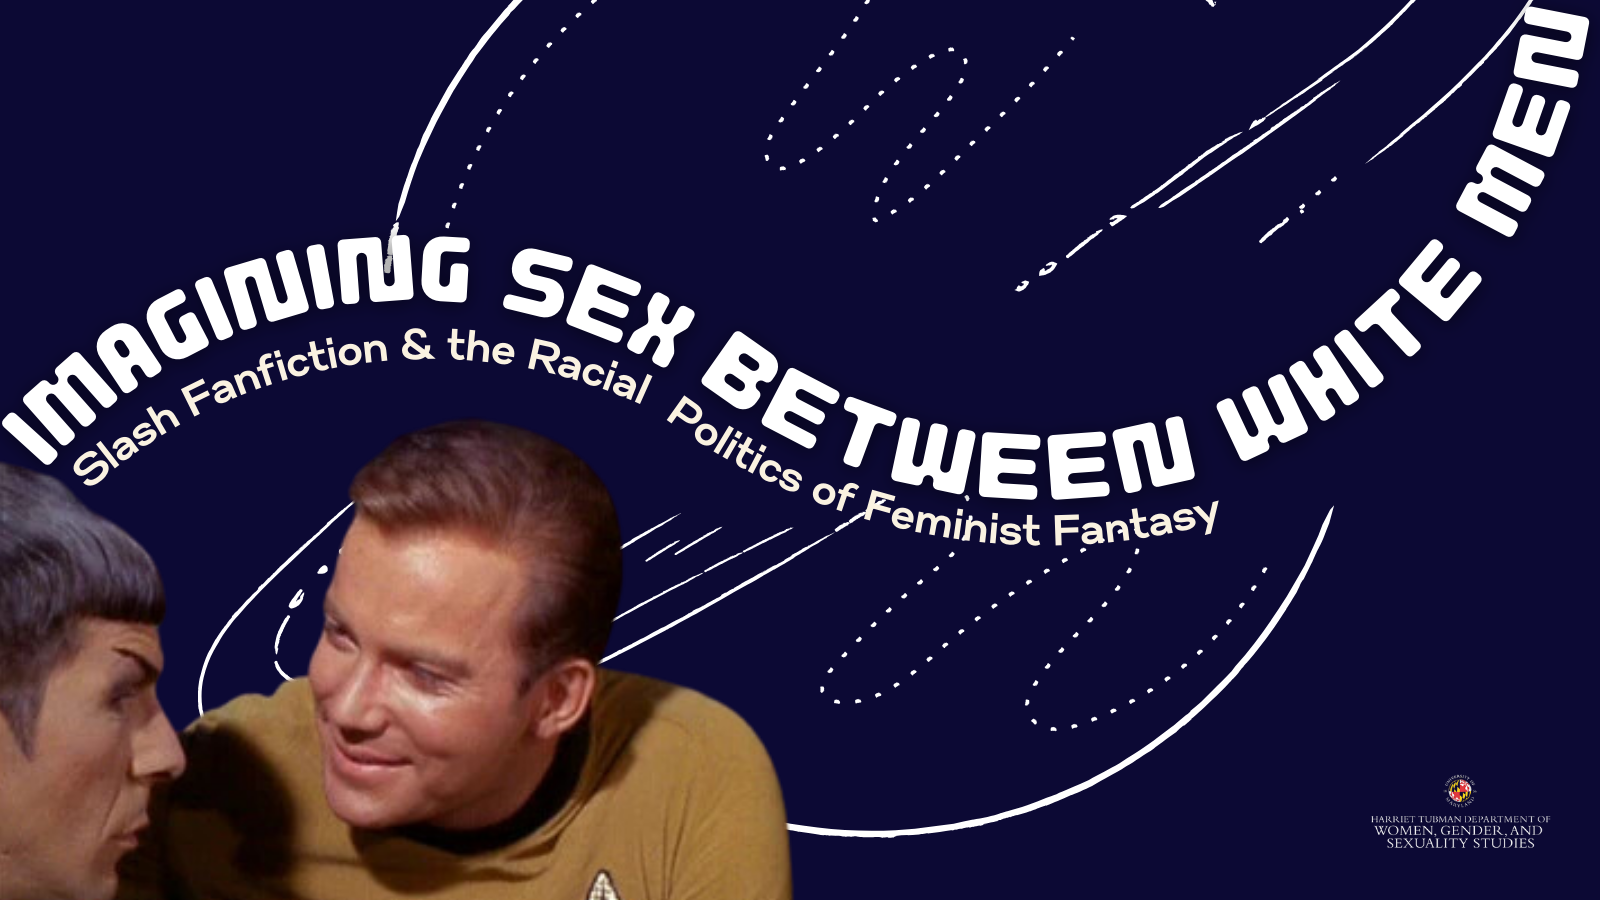 Kirk and Spock stare into each other's eyes beneath the title of the talk